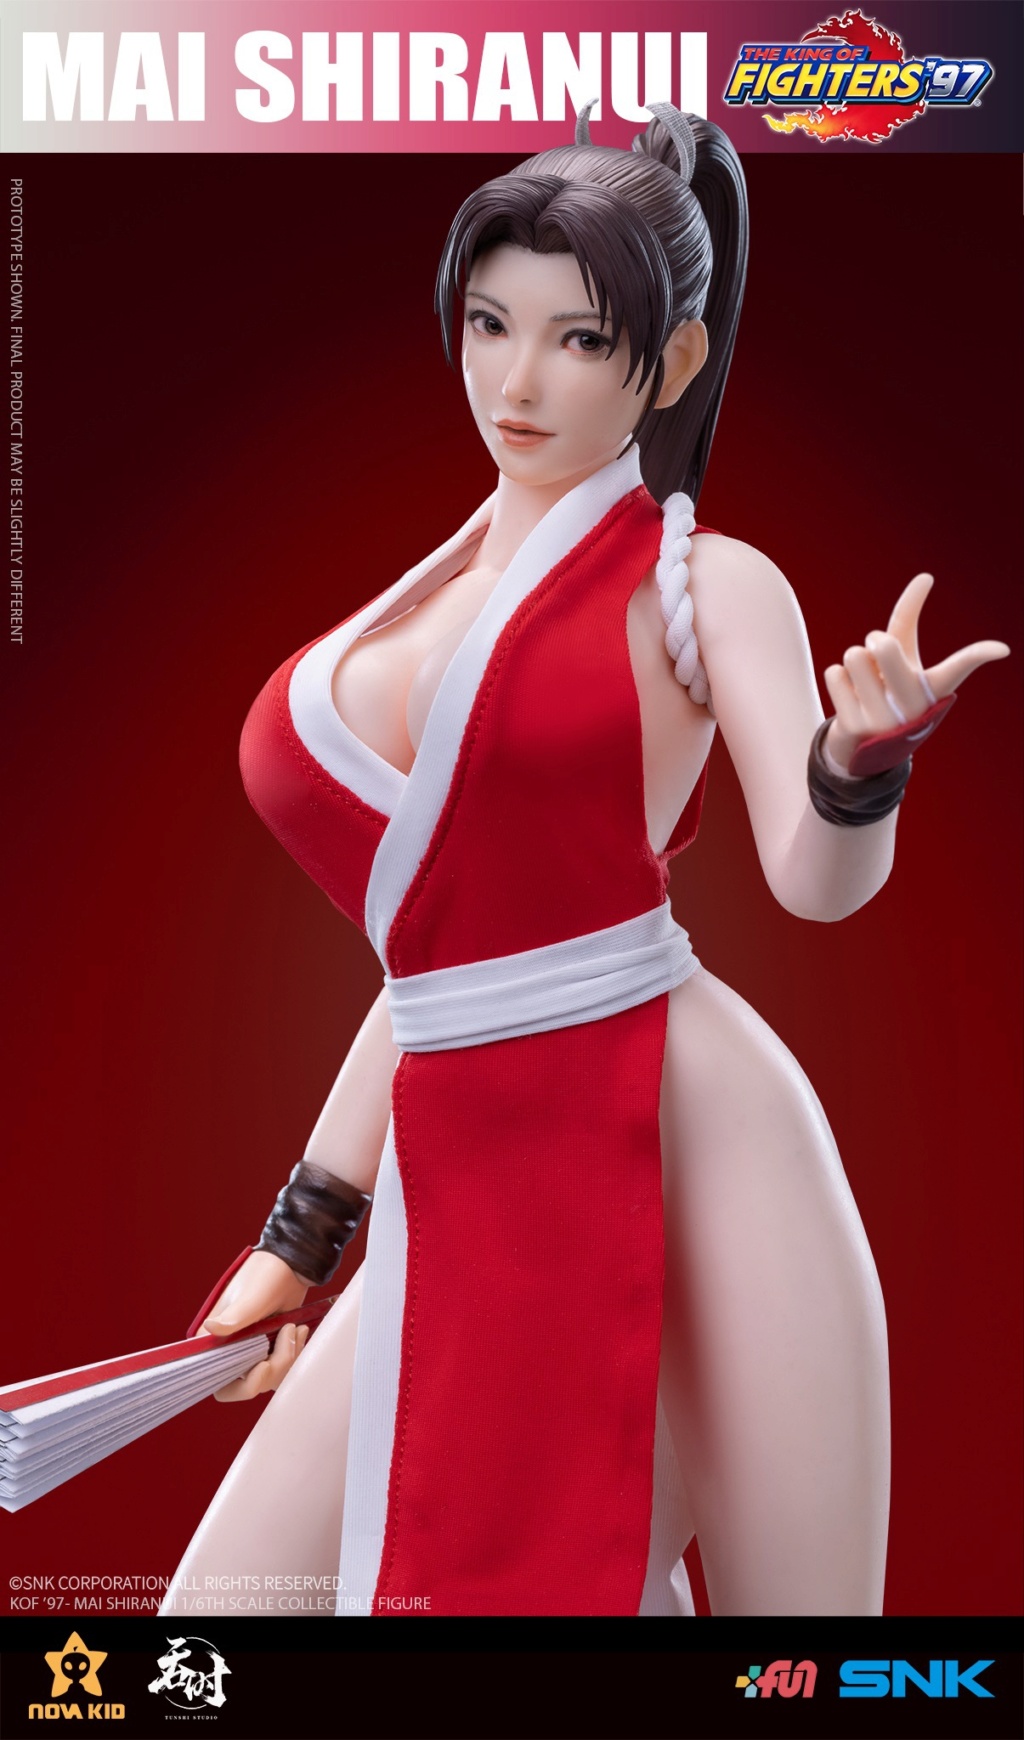 KingofFighters97 - NEW PRODUCT: Tunshi Studio: SNK Genuine Licensing "King of Fighters 97" - Mai Shiranui (MAI SHIRANUI) 1/6 movable cloth puppet 22203810